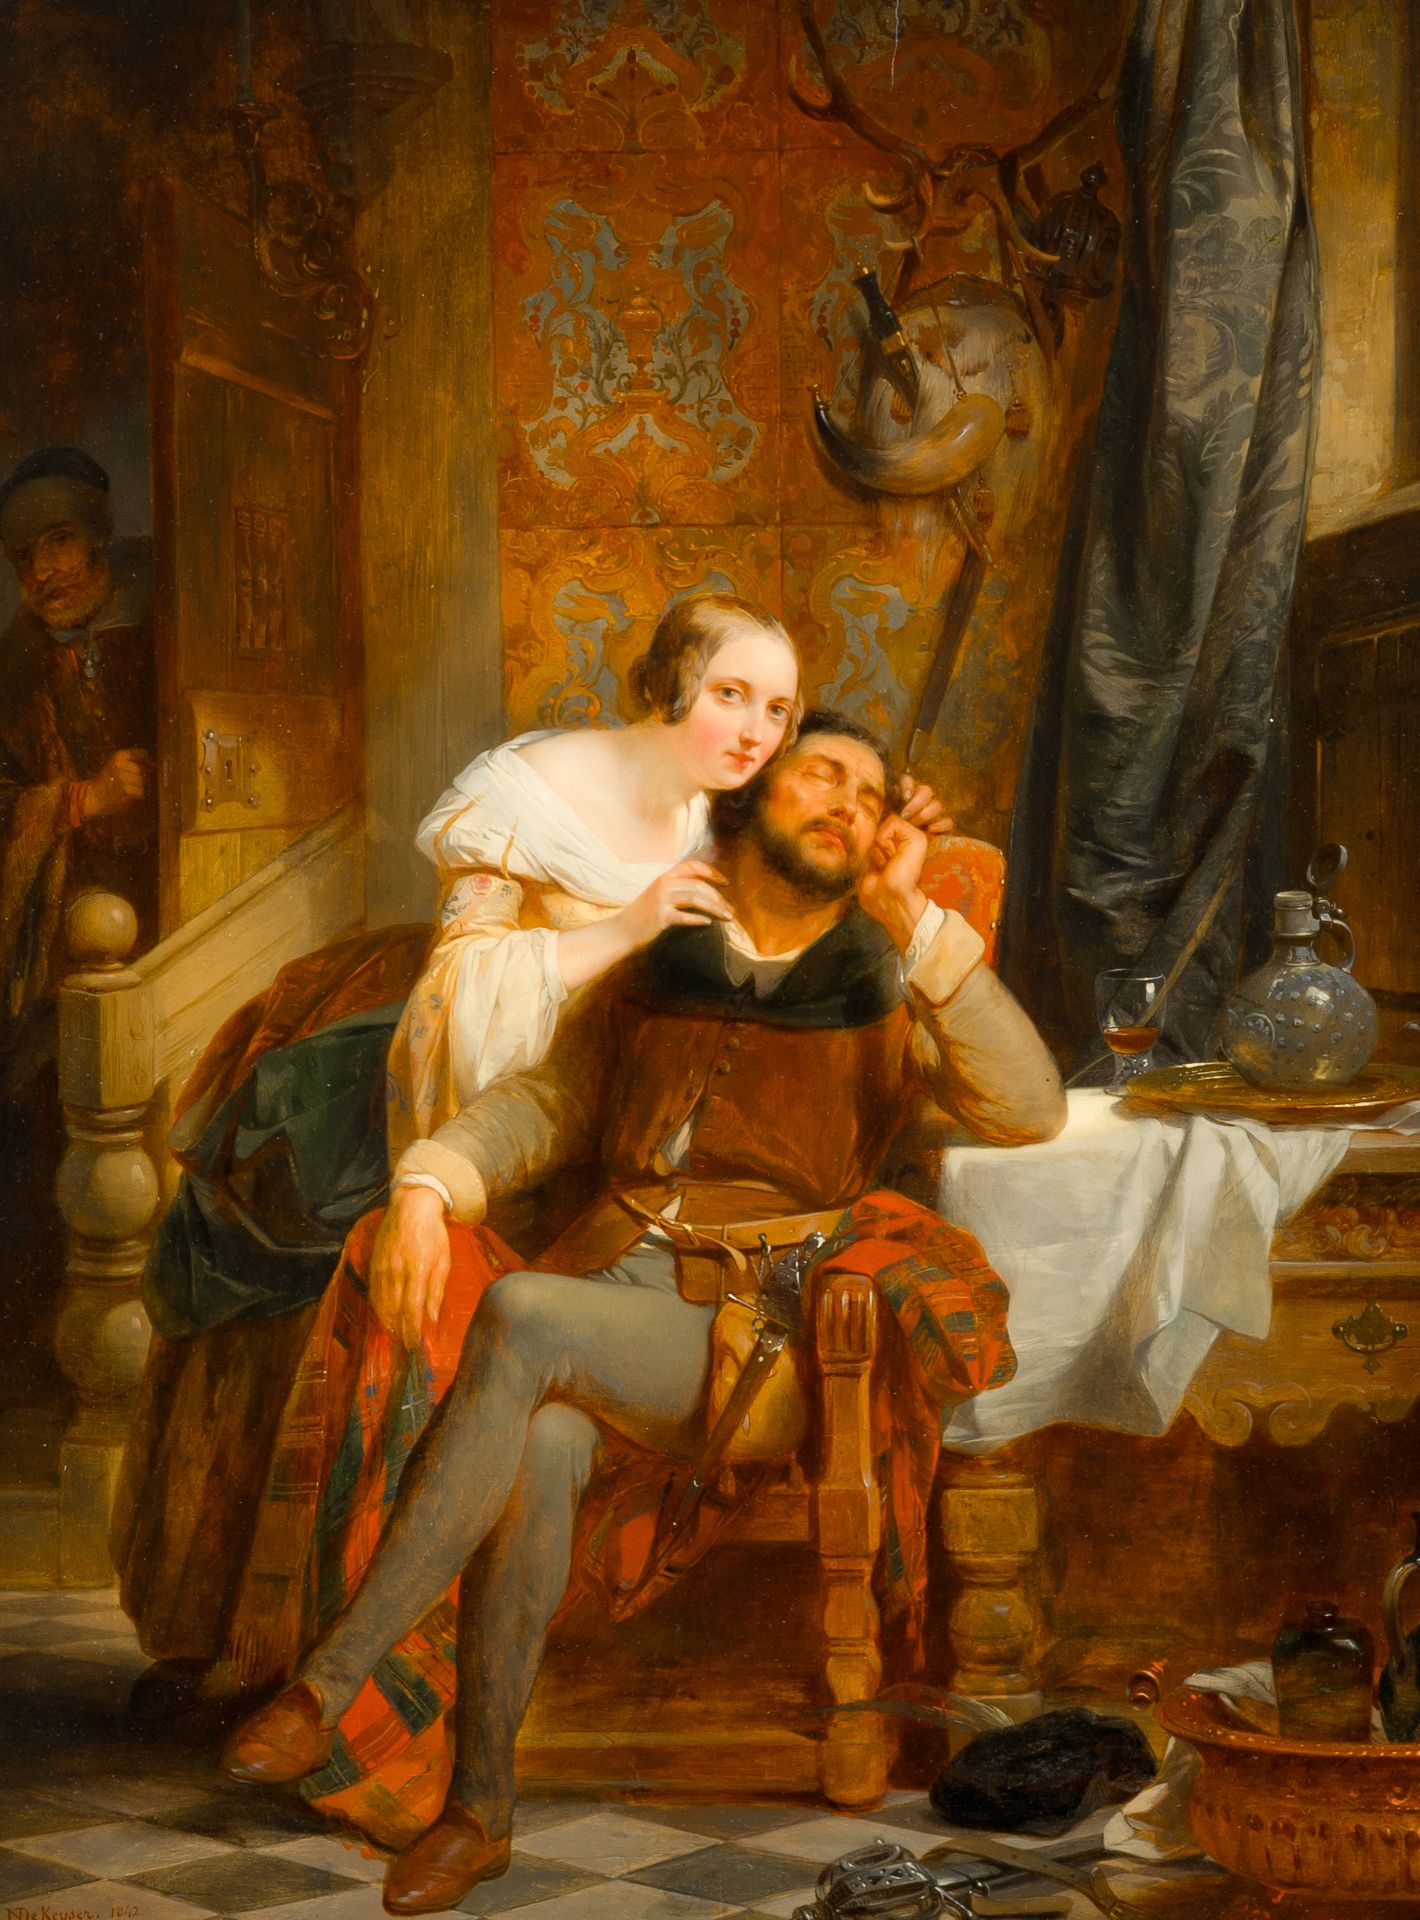 Nicaise De Keyser (1813-1887): The unguarded moment, oil on panel, dated 1842